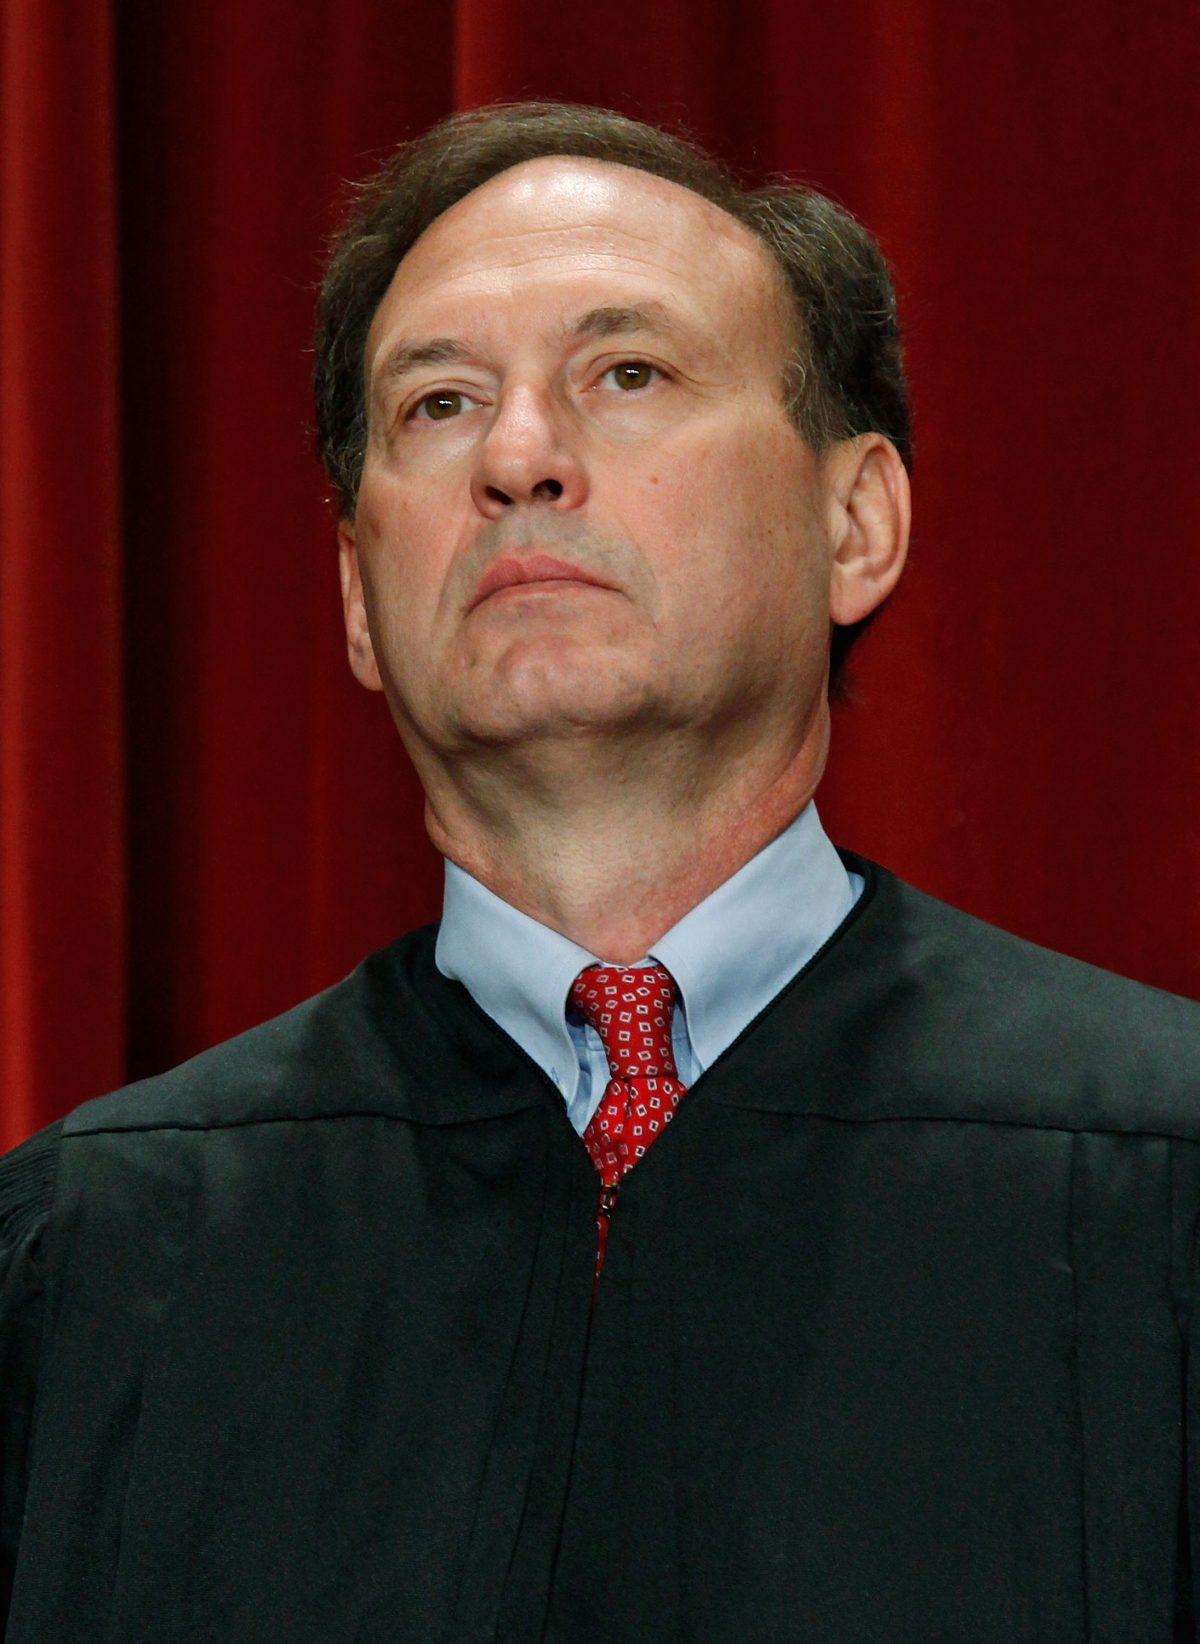 Associate Justice Samuel Alito poses during a group photograph at the Supreme Court building in Washington on Sept. 29, 2009. (Mark Wilson/Getty Images)